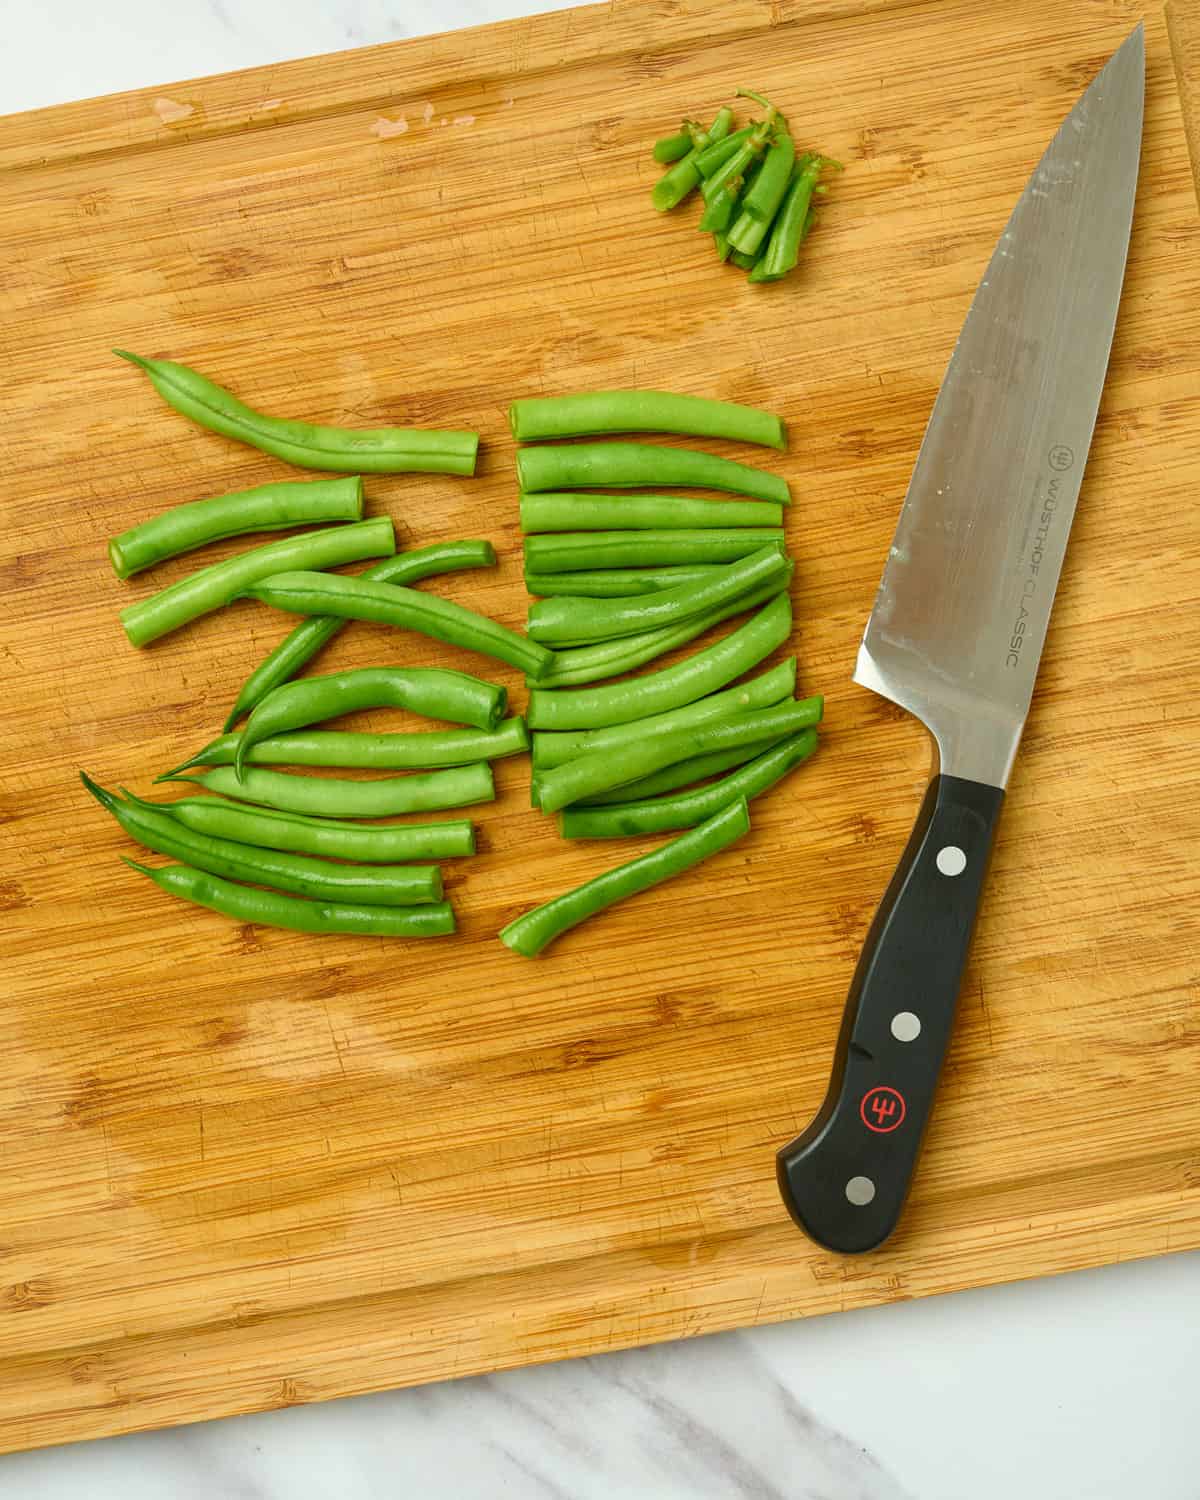 Green beans on a cutting board with stem ends trimmed off and cut in half.